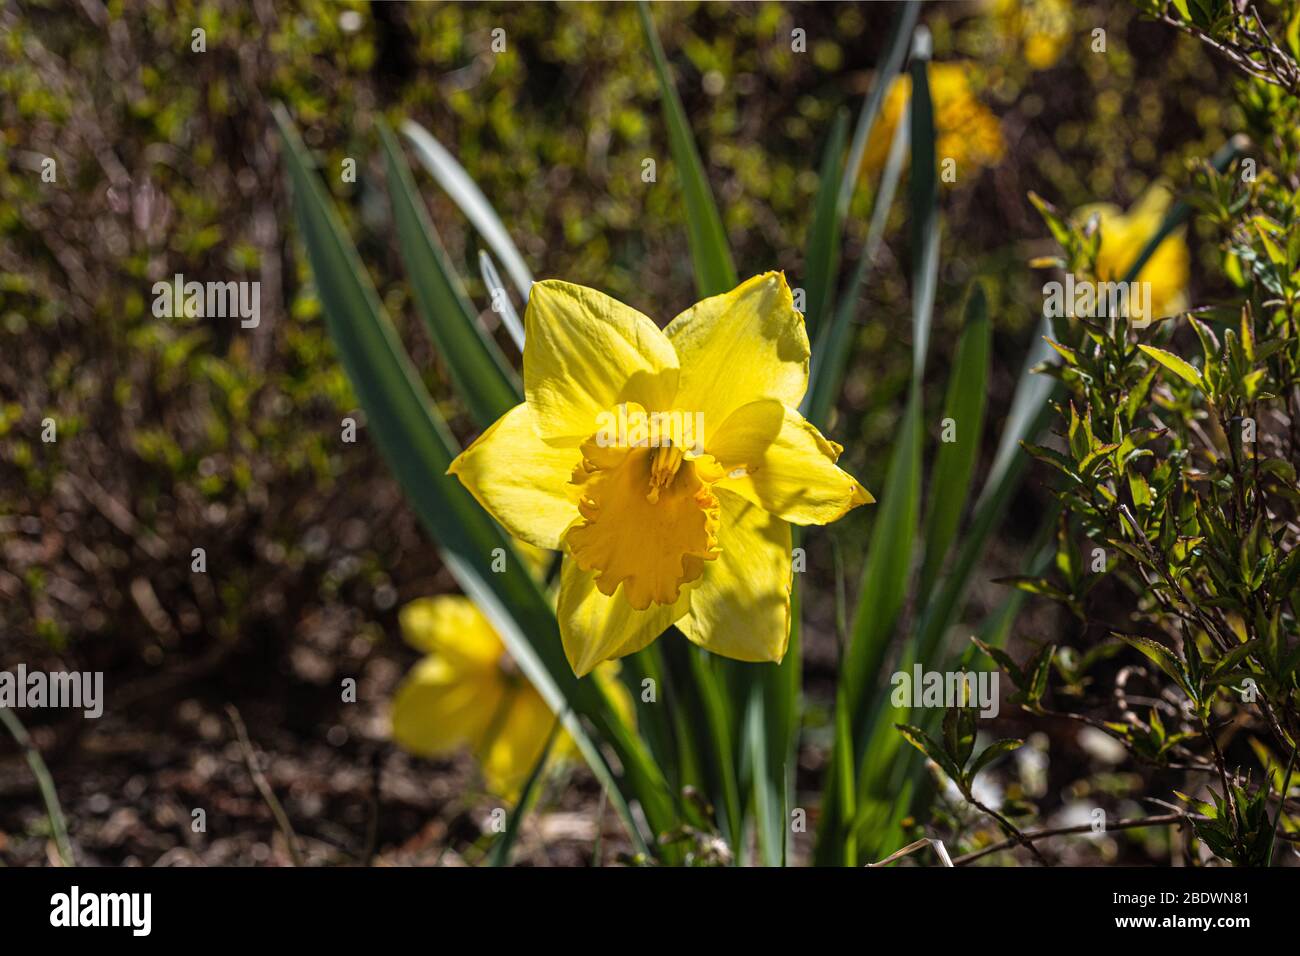 Narcissus is a genus of predominantly spring perennial plant. Stock Photo